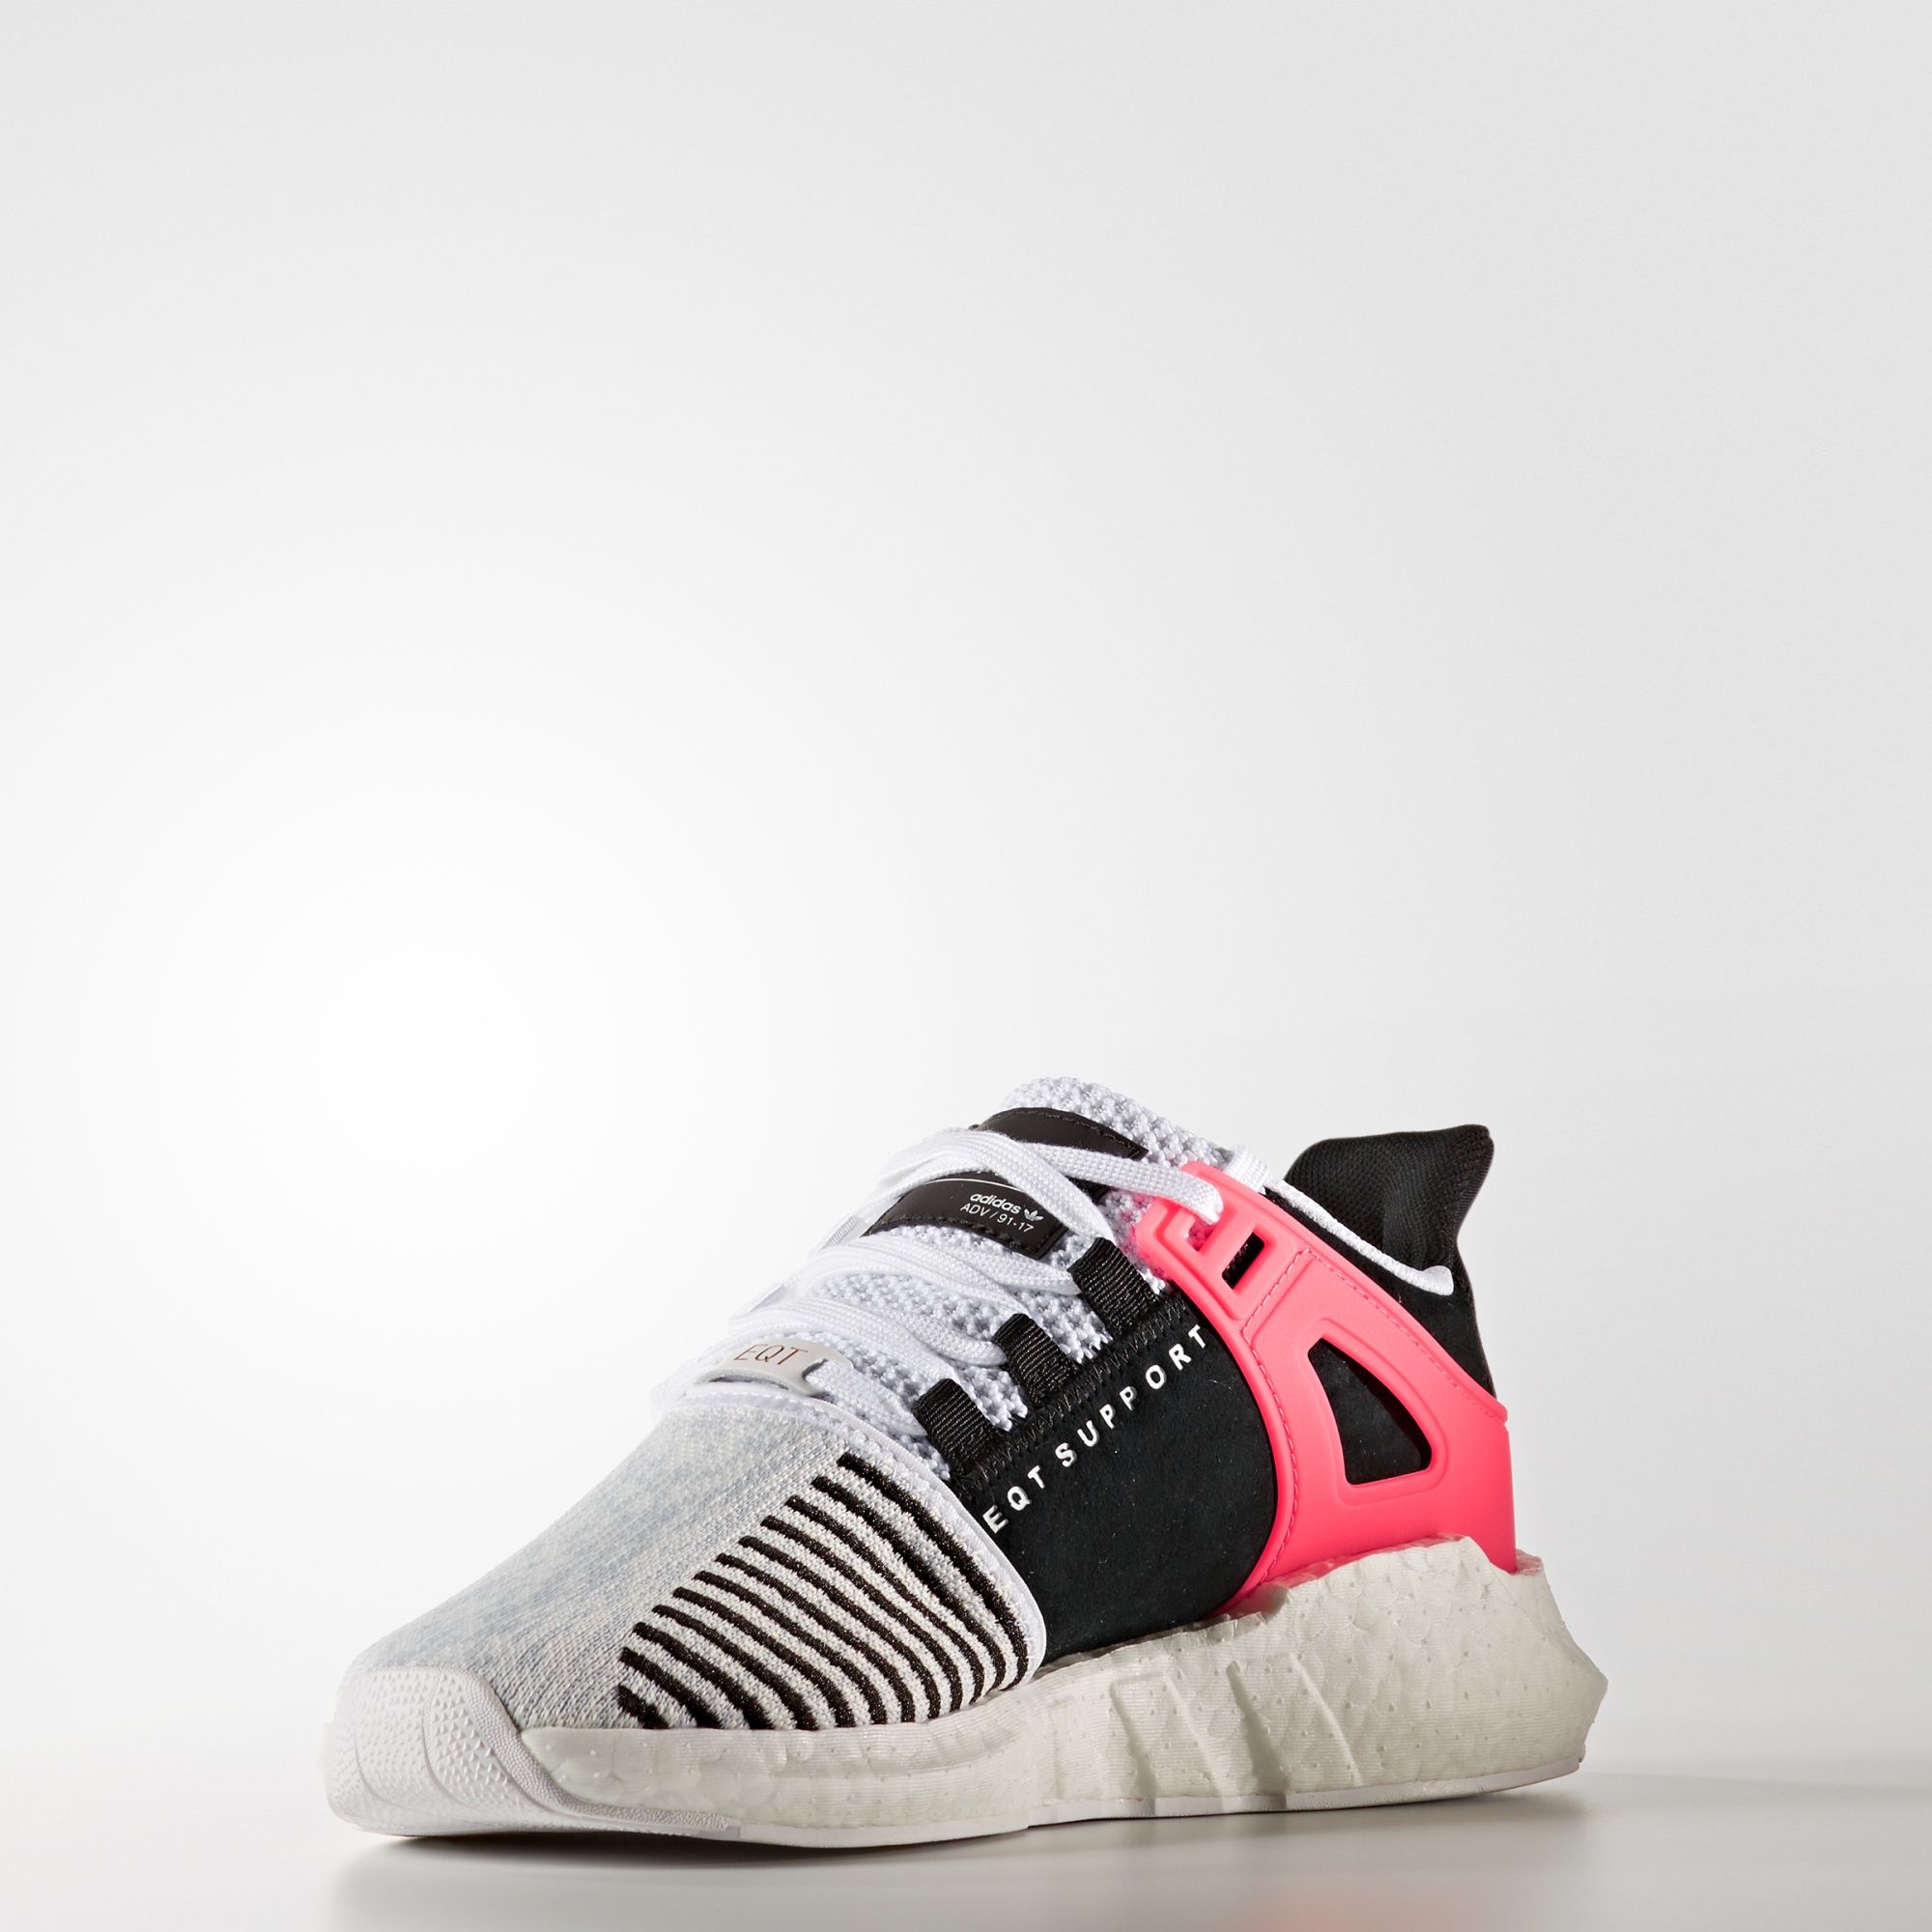 adidas-eqt-support-9317-white-turbo-red-3